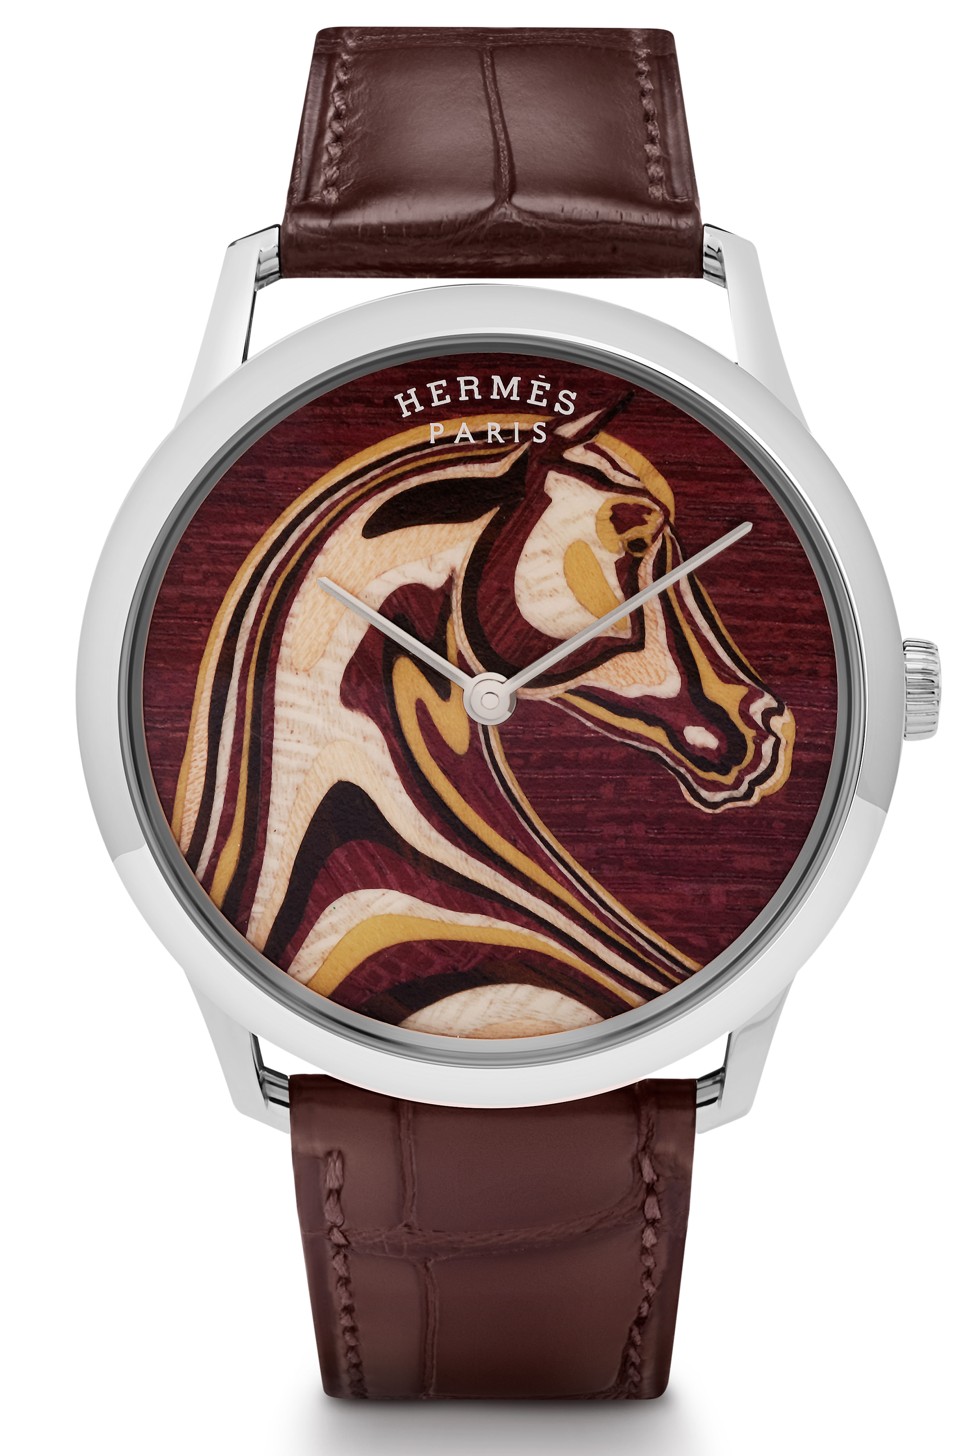 The Slim d’Hermès Pégase Paysage is a unique tribute to the brand’s equestrian heritage.